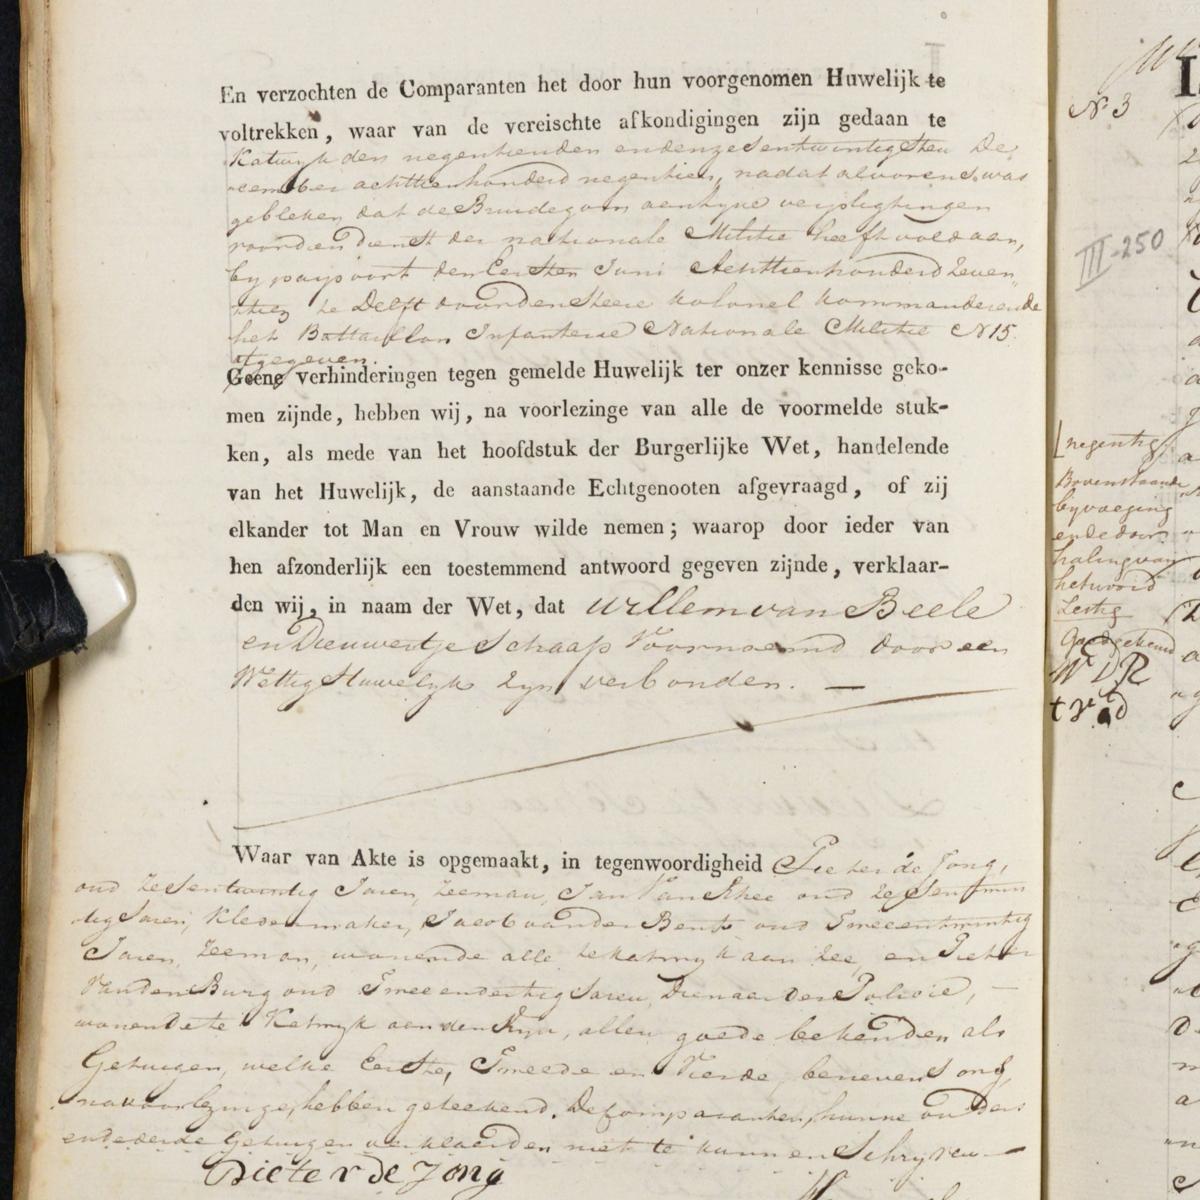 Civil registry of marriages, Katwijk, 1820, record 2, second page